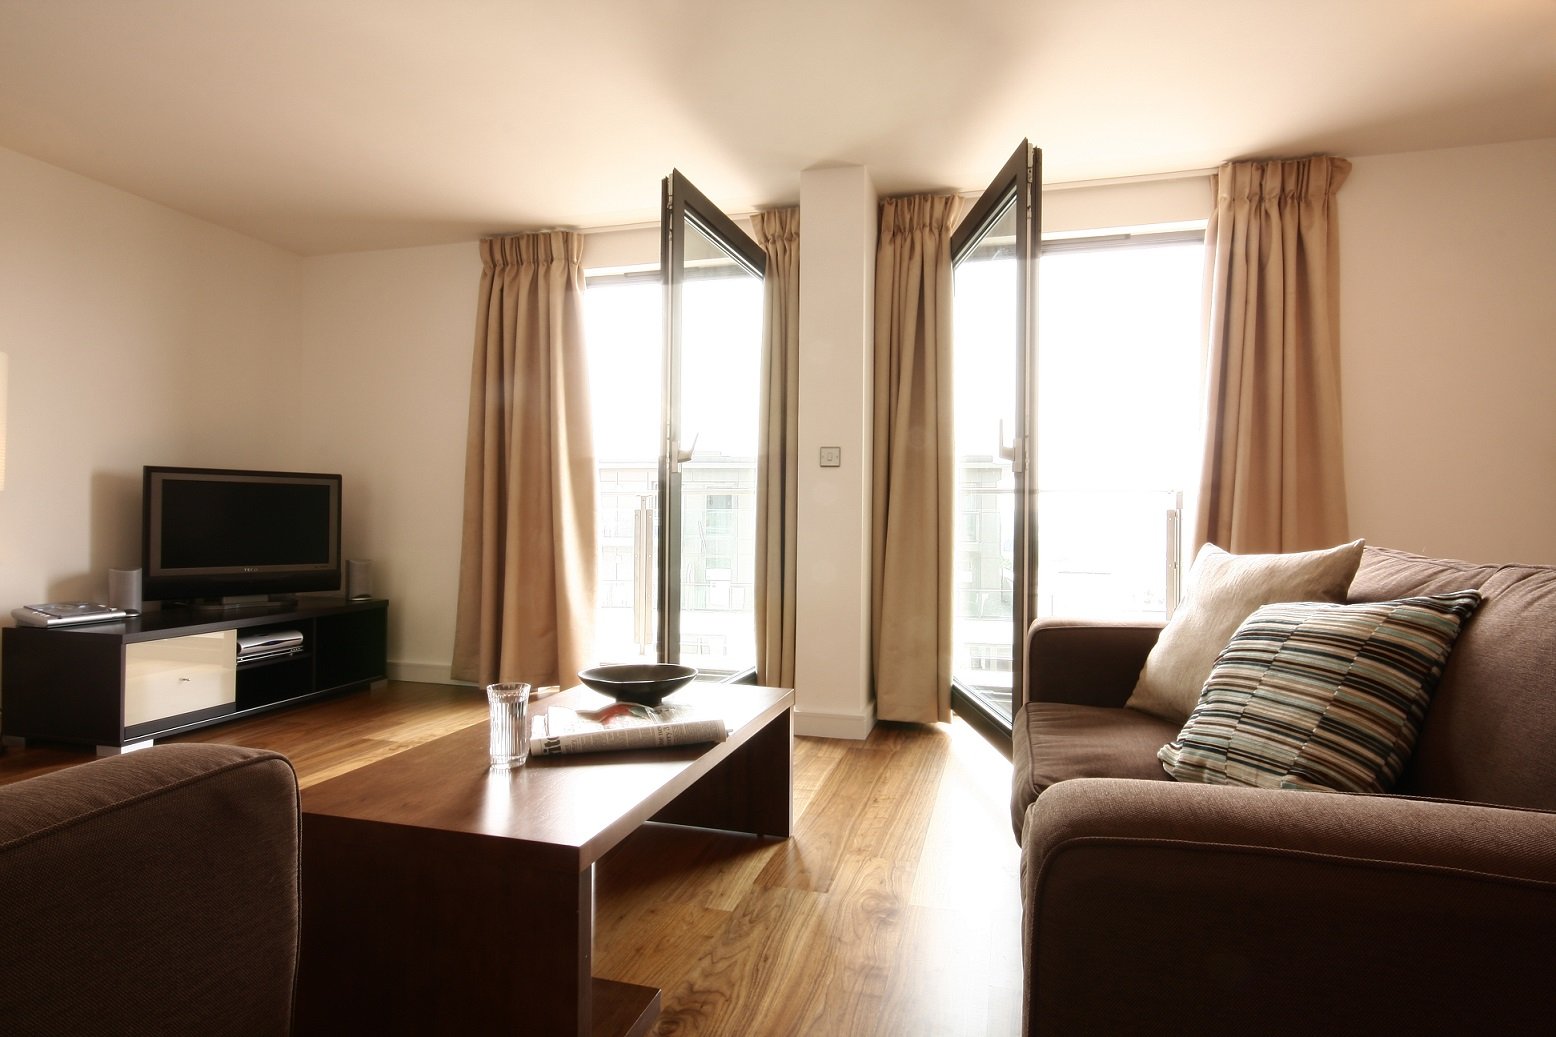 Lexington Slough Accommodation Serviced Apartments - Slough | Urban Stay